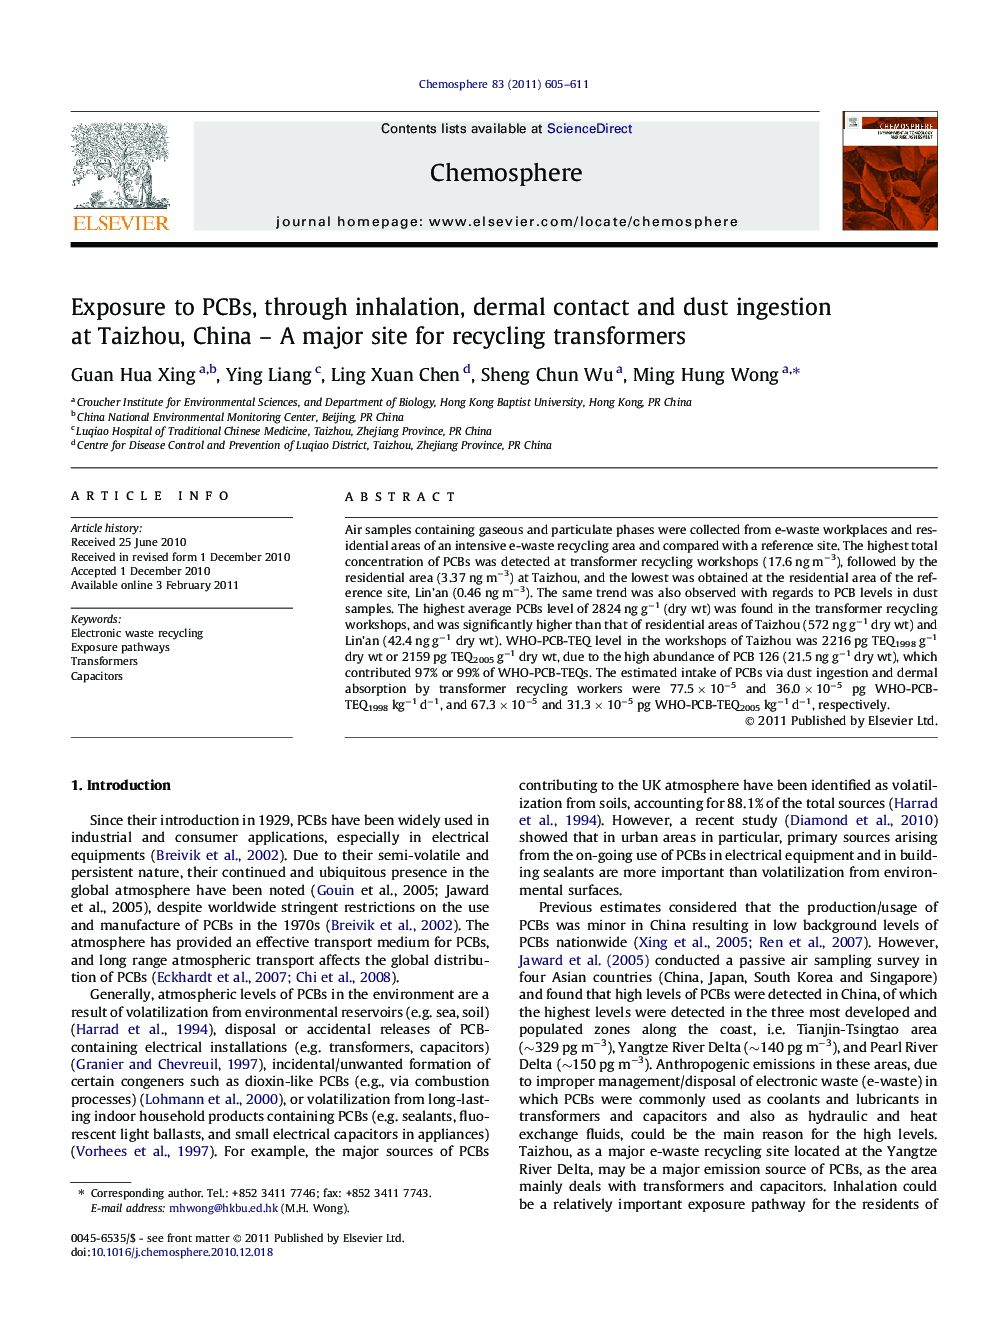 Exposure to PCBs, through inhalation, dermal contact and dust ingestion at Taizhou, China – A major site for recycling transformers